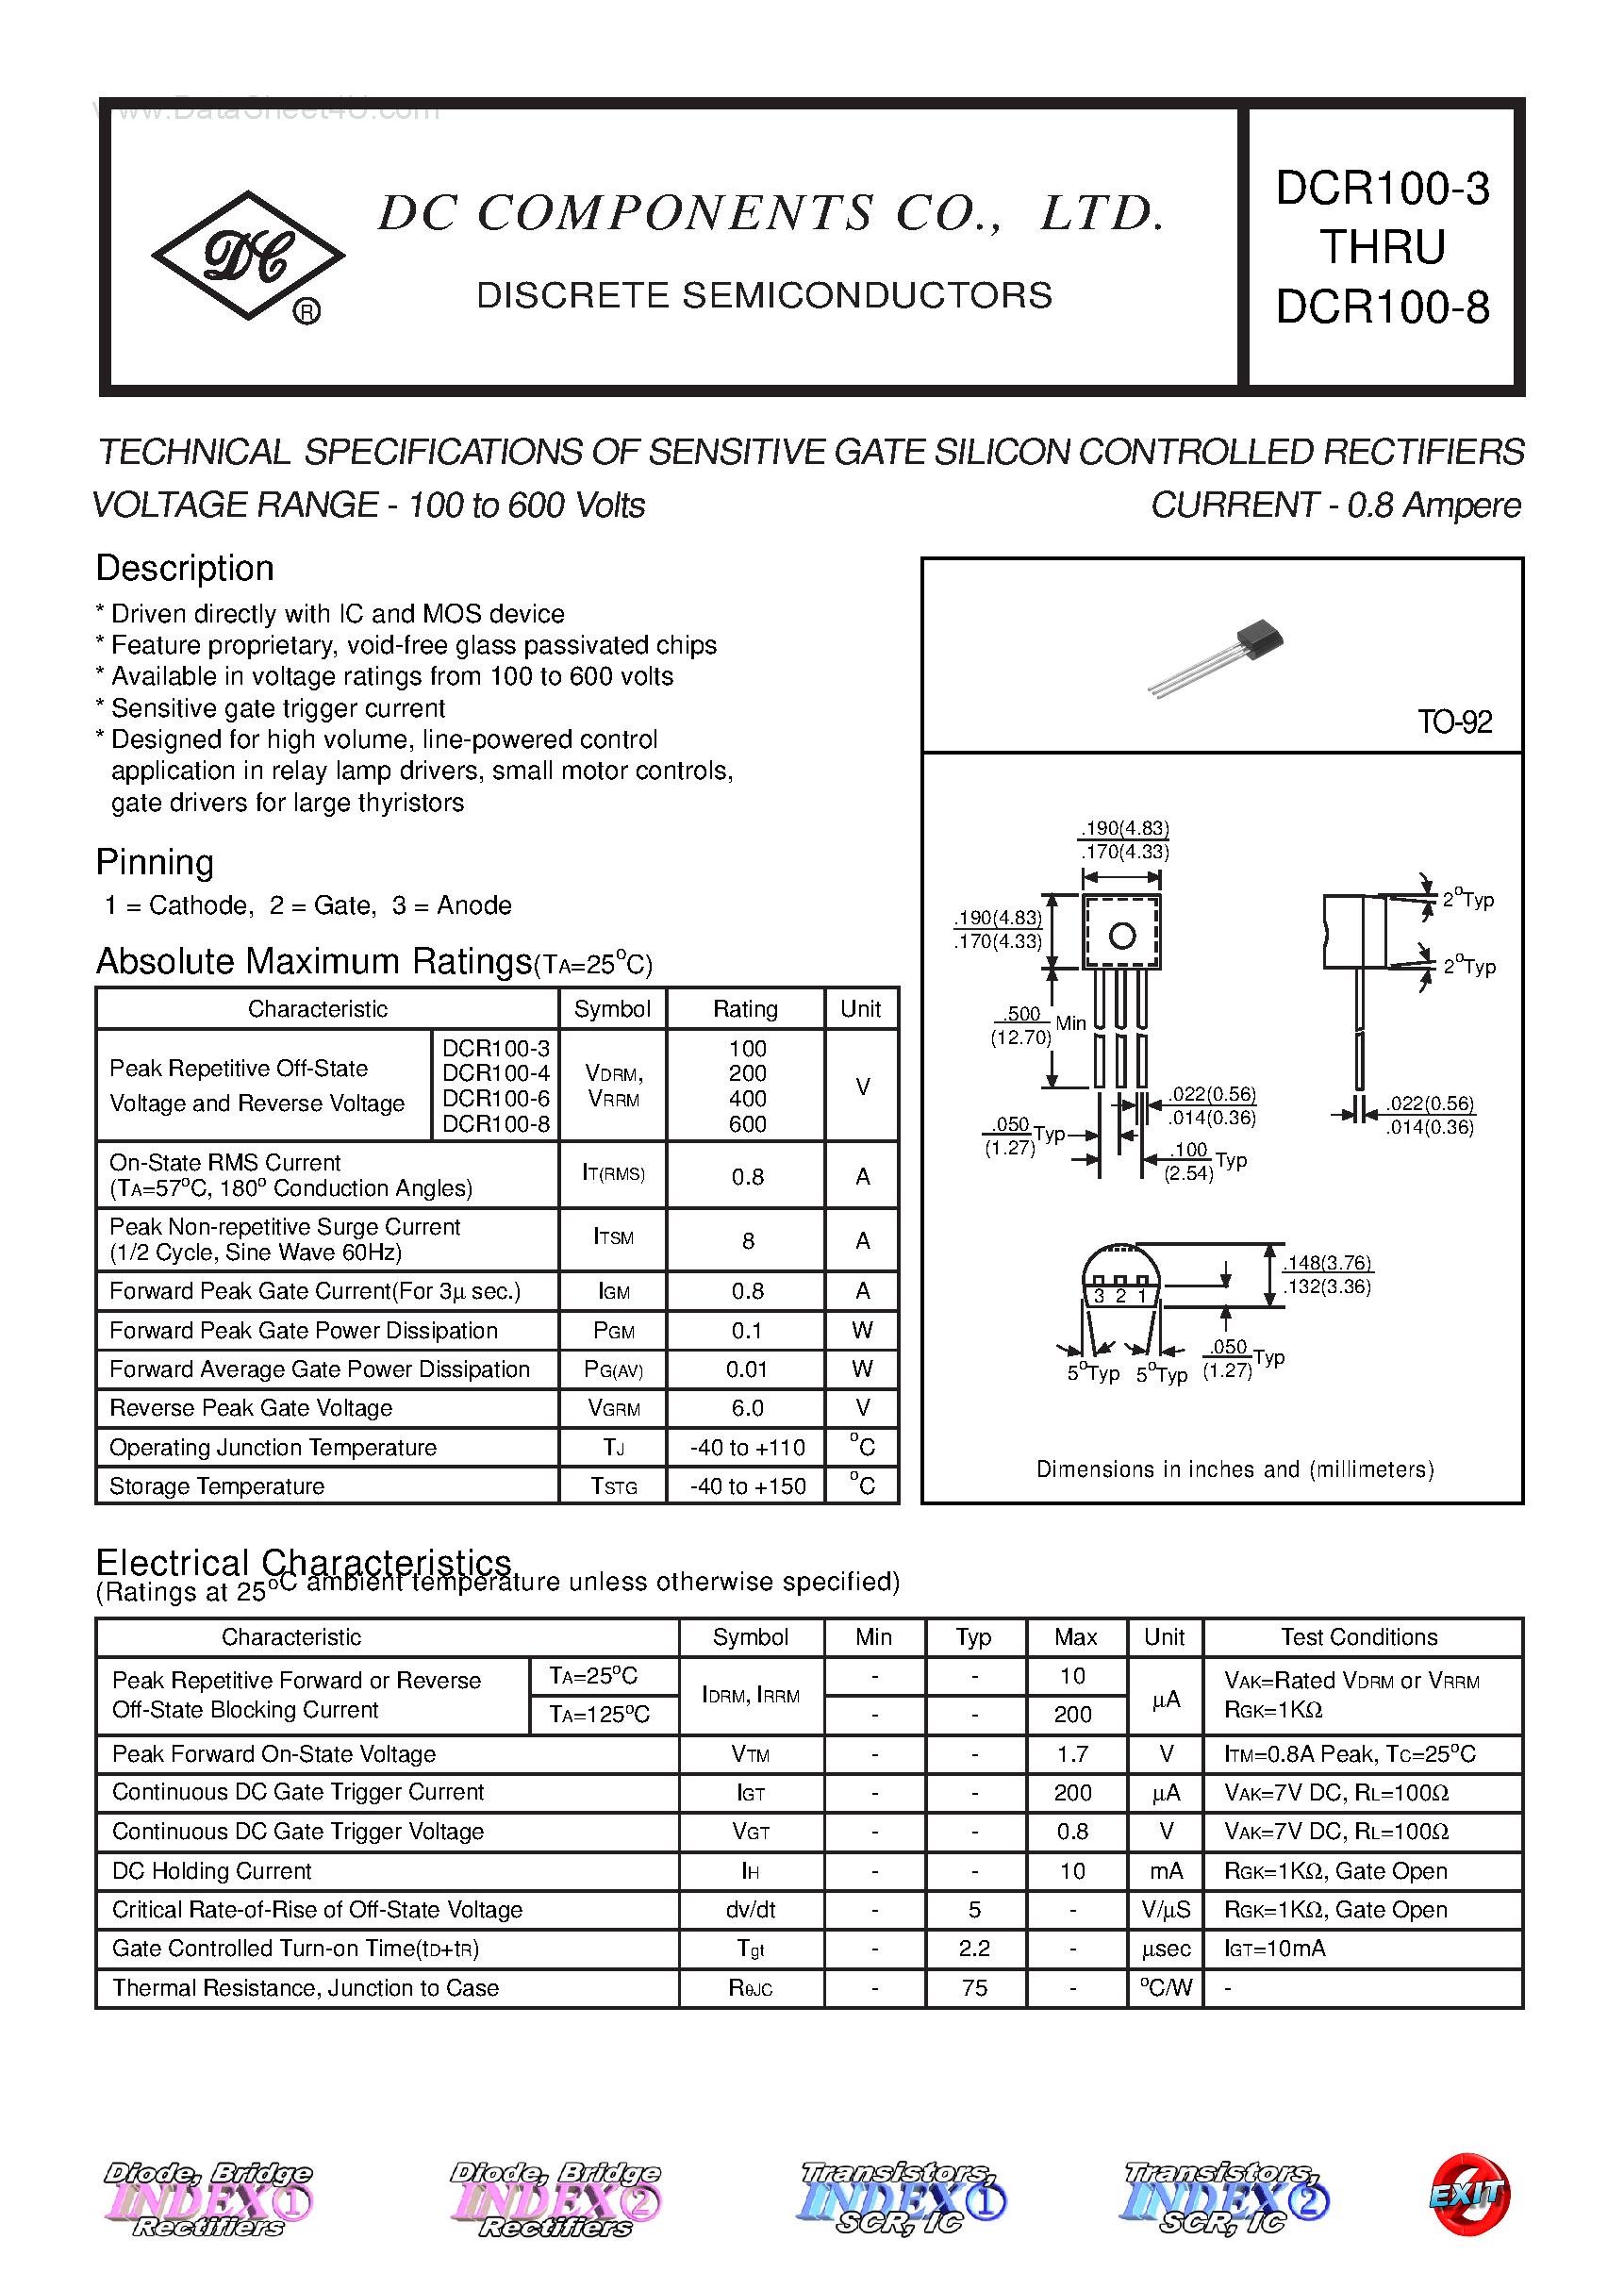 Datasheet DCR100-3 - (DCR100-3 - DCR100-8) TECHNICAL SPECIFICATIONS OF SENSITIVE GATE SILICON CONTROLLED RECTIFIERS page 1